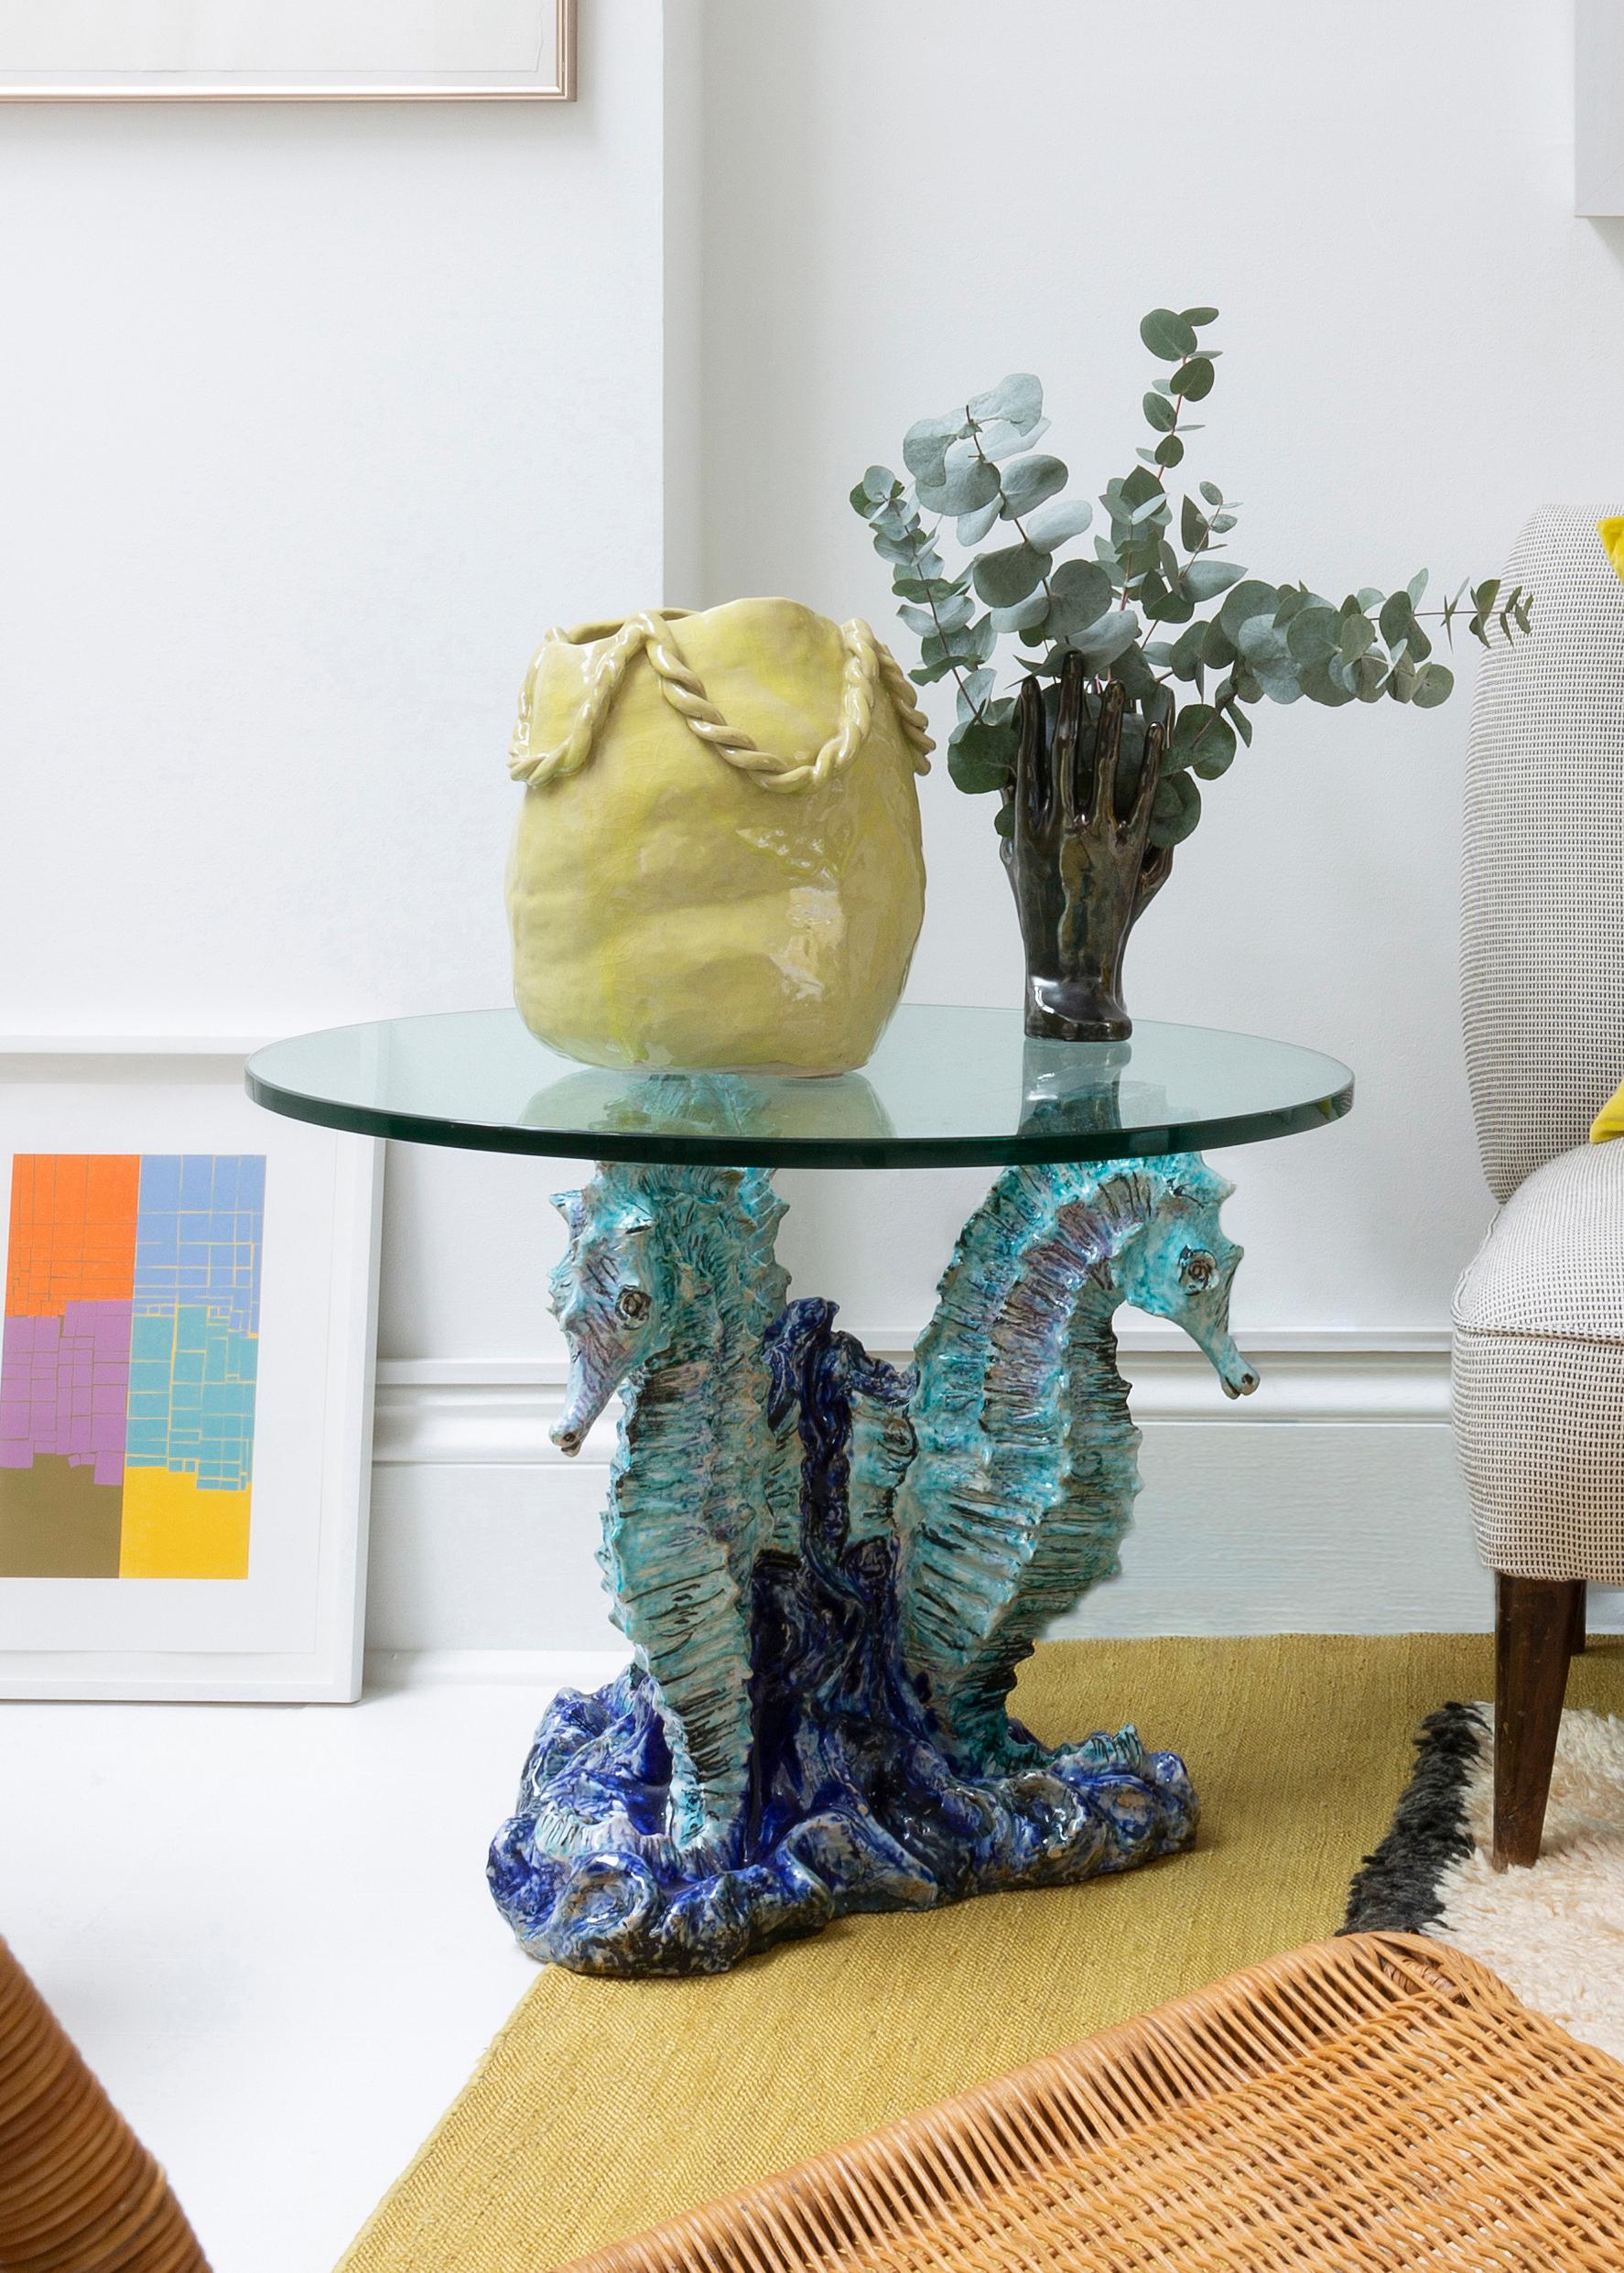 Quirky Italian side table with sculptural ceramic base in the shape of seahorses and a glass top. 1960s.

Dimensions: 50 x 60 x 60 cm.